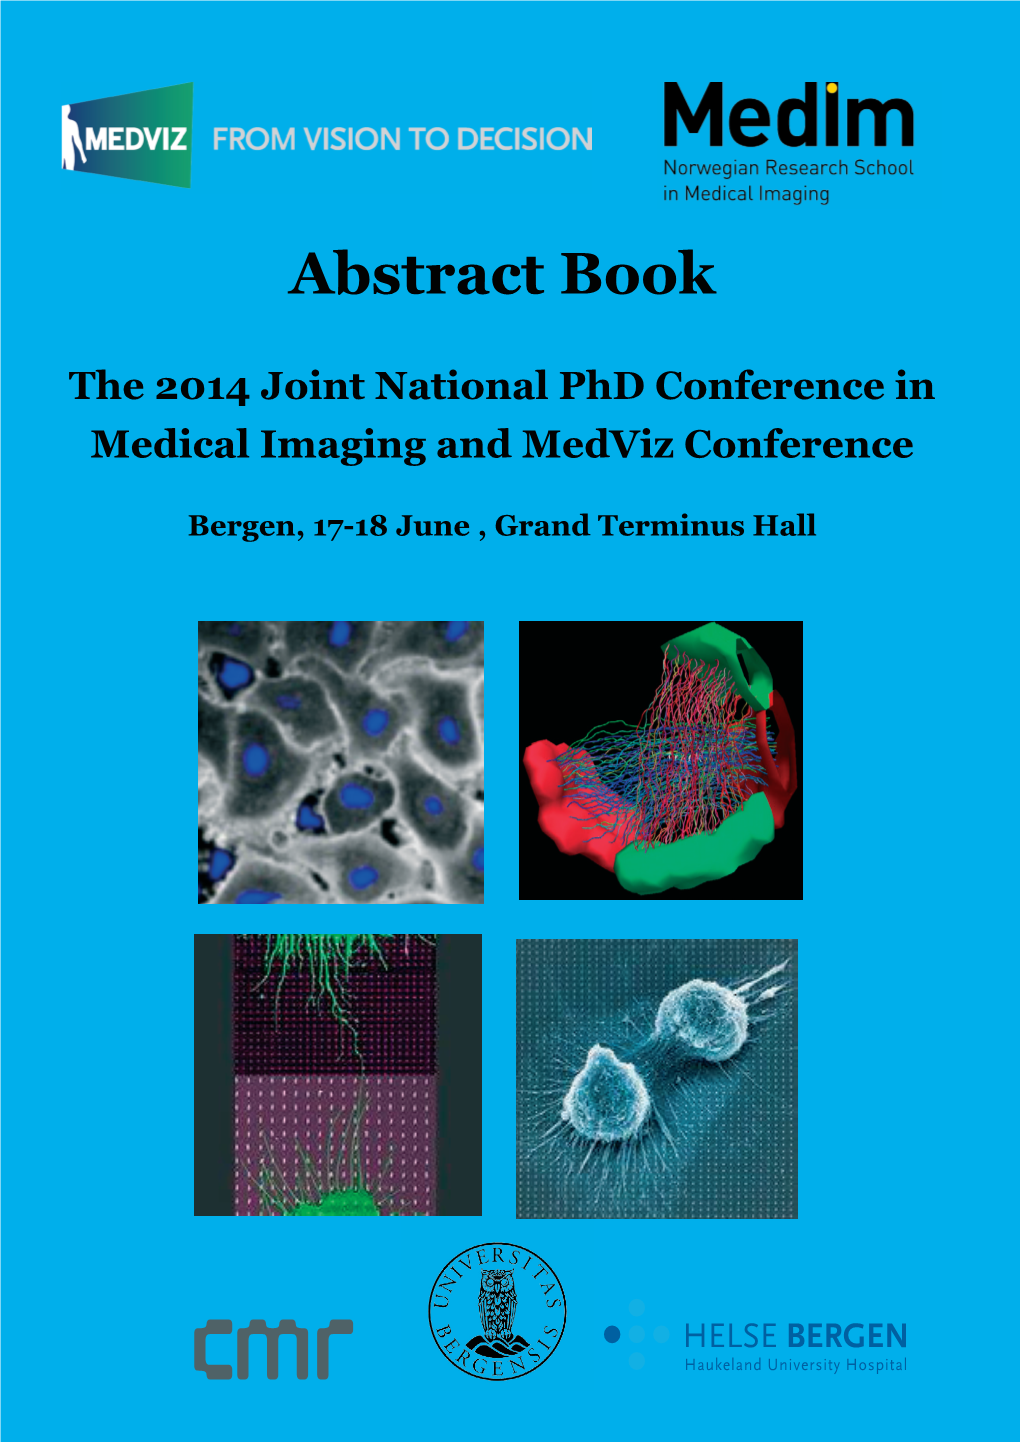 2014 Joint National Phd Conference in Medical Imaging and Medviz Conference